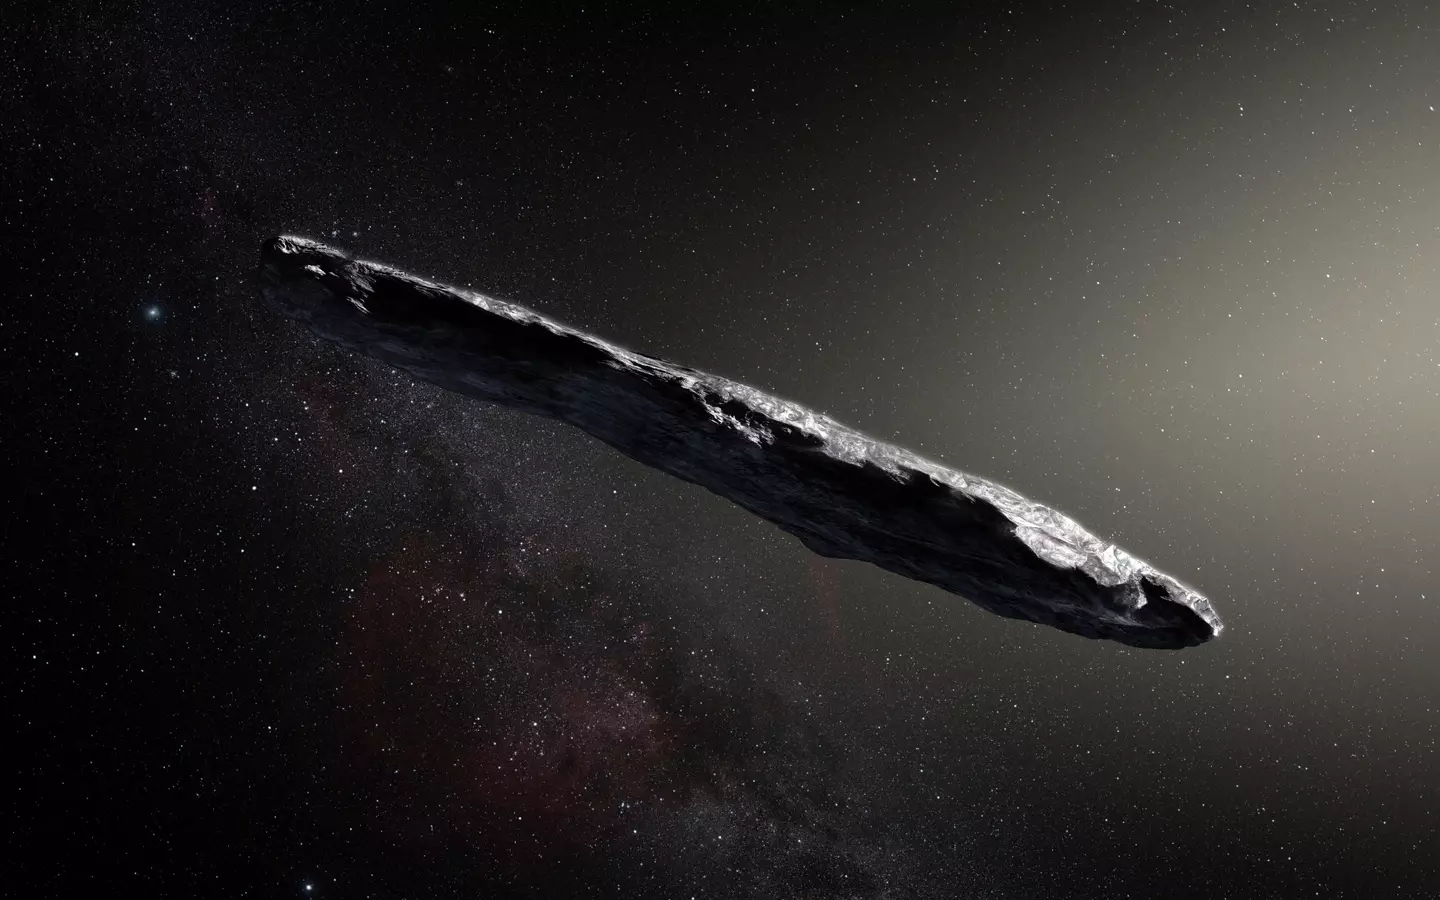 Oumuamua has made its way out of the solar system.